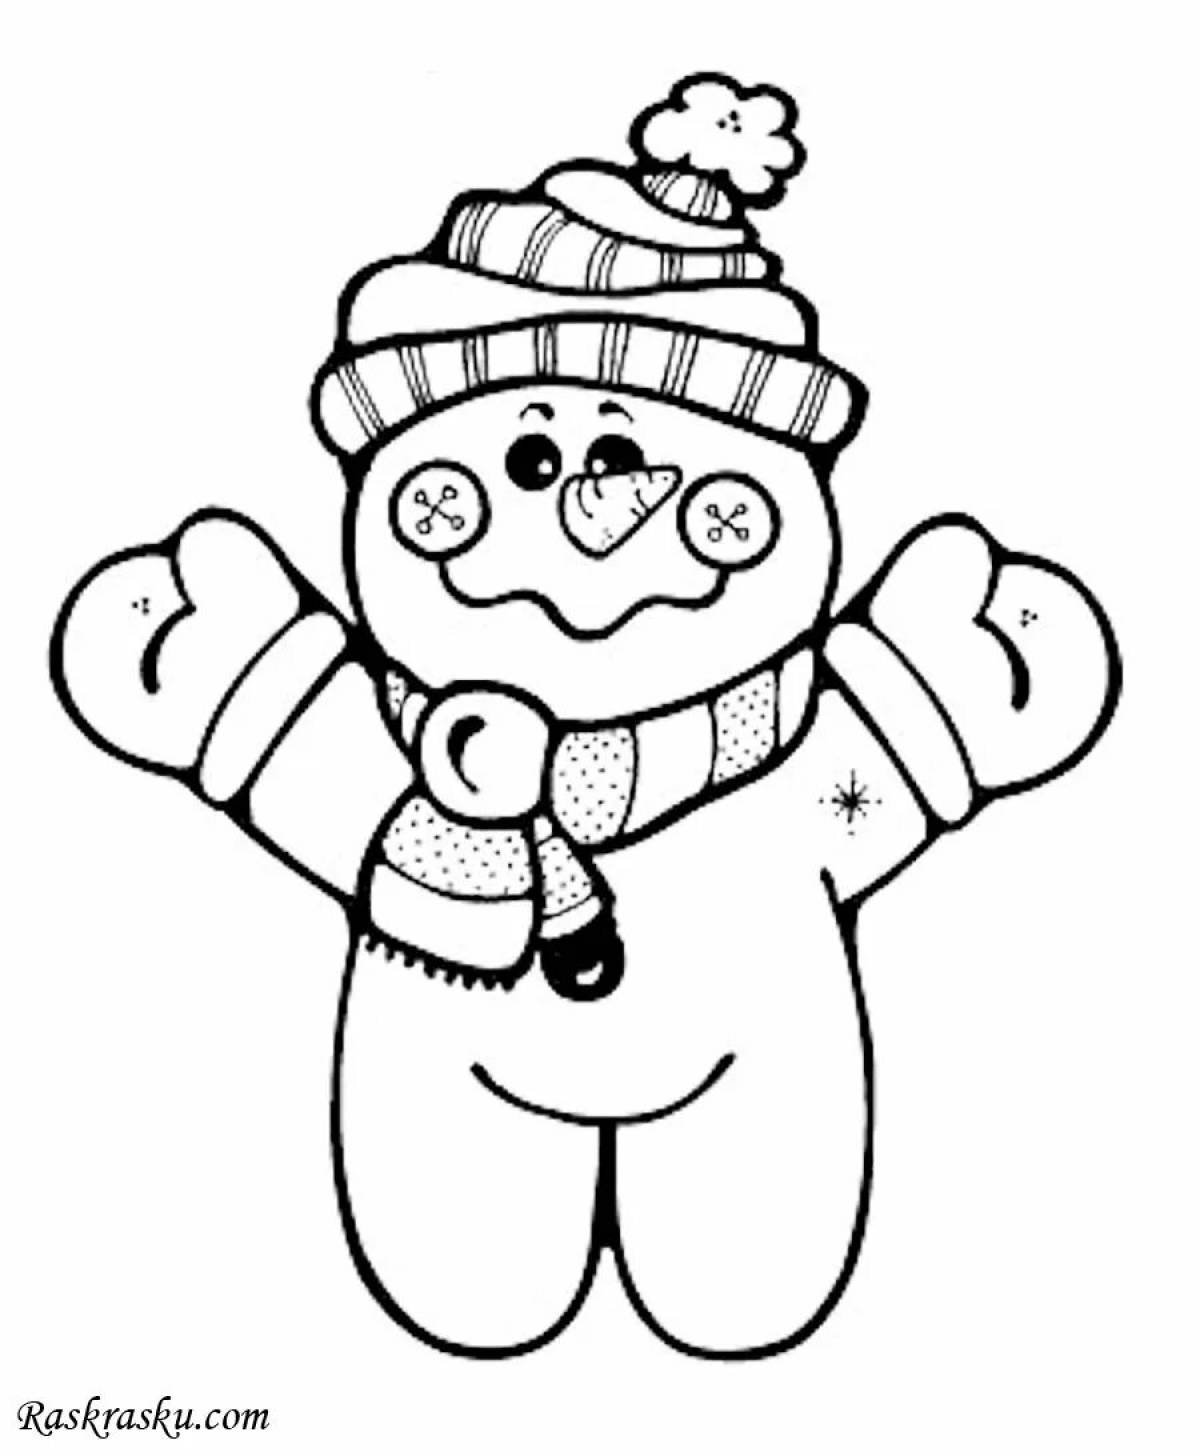 Funny snowman for kids #2